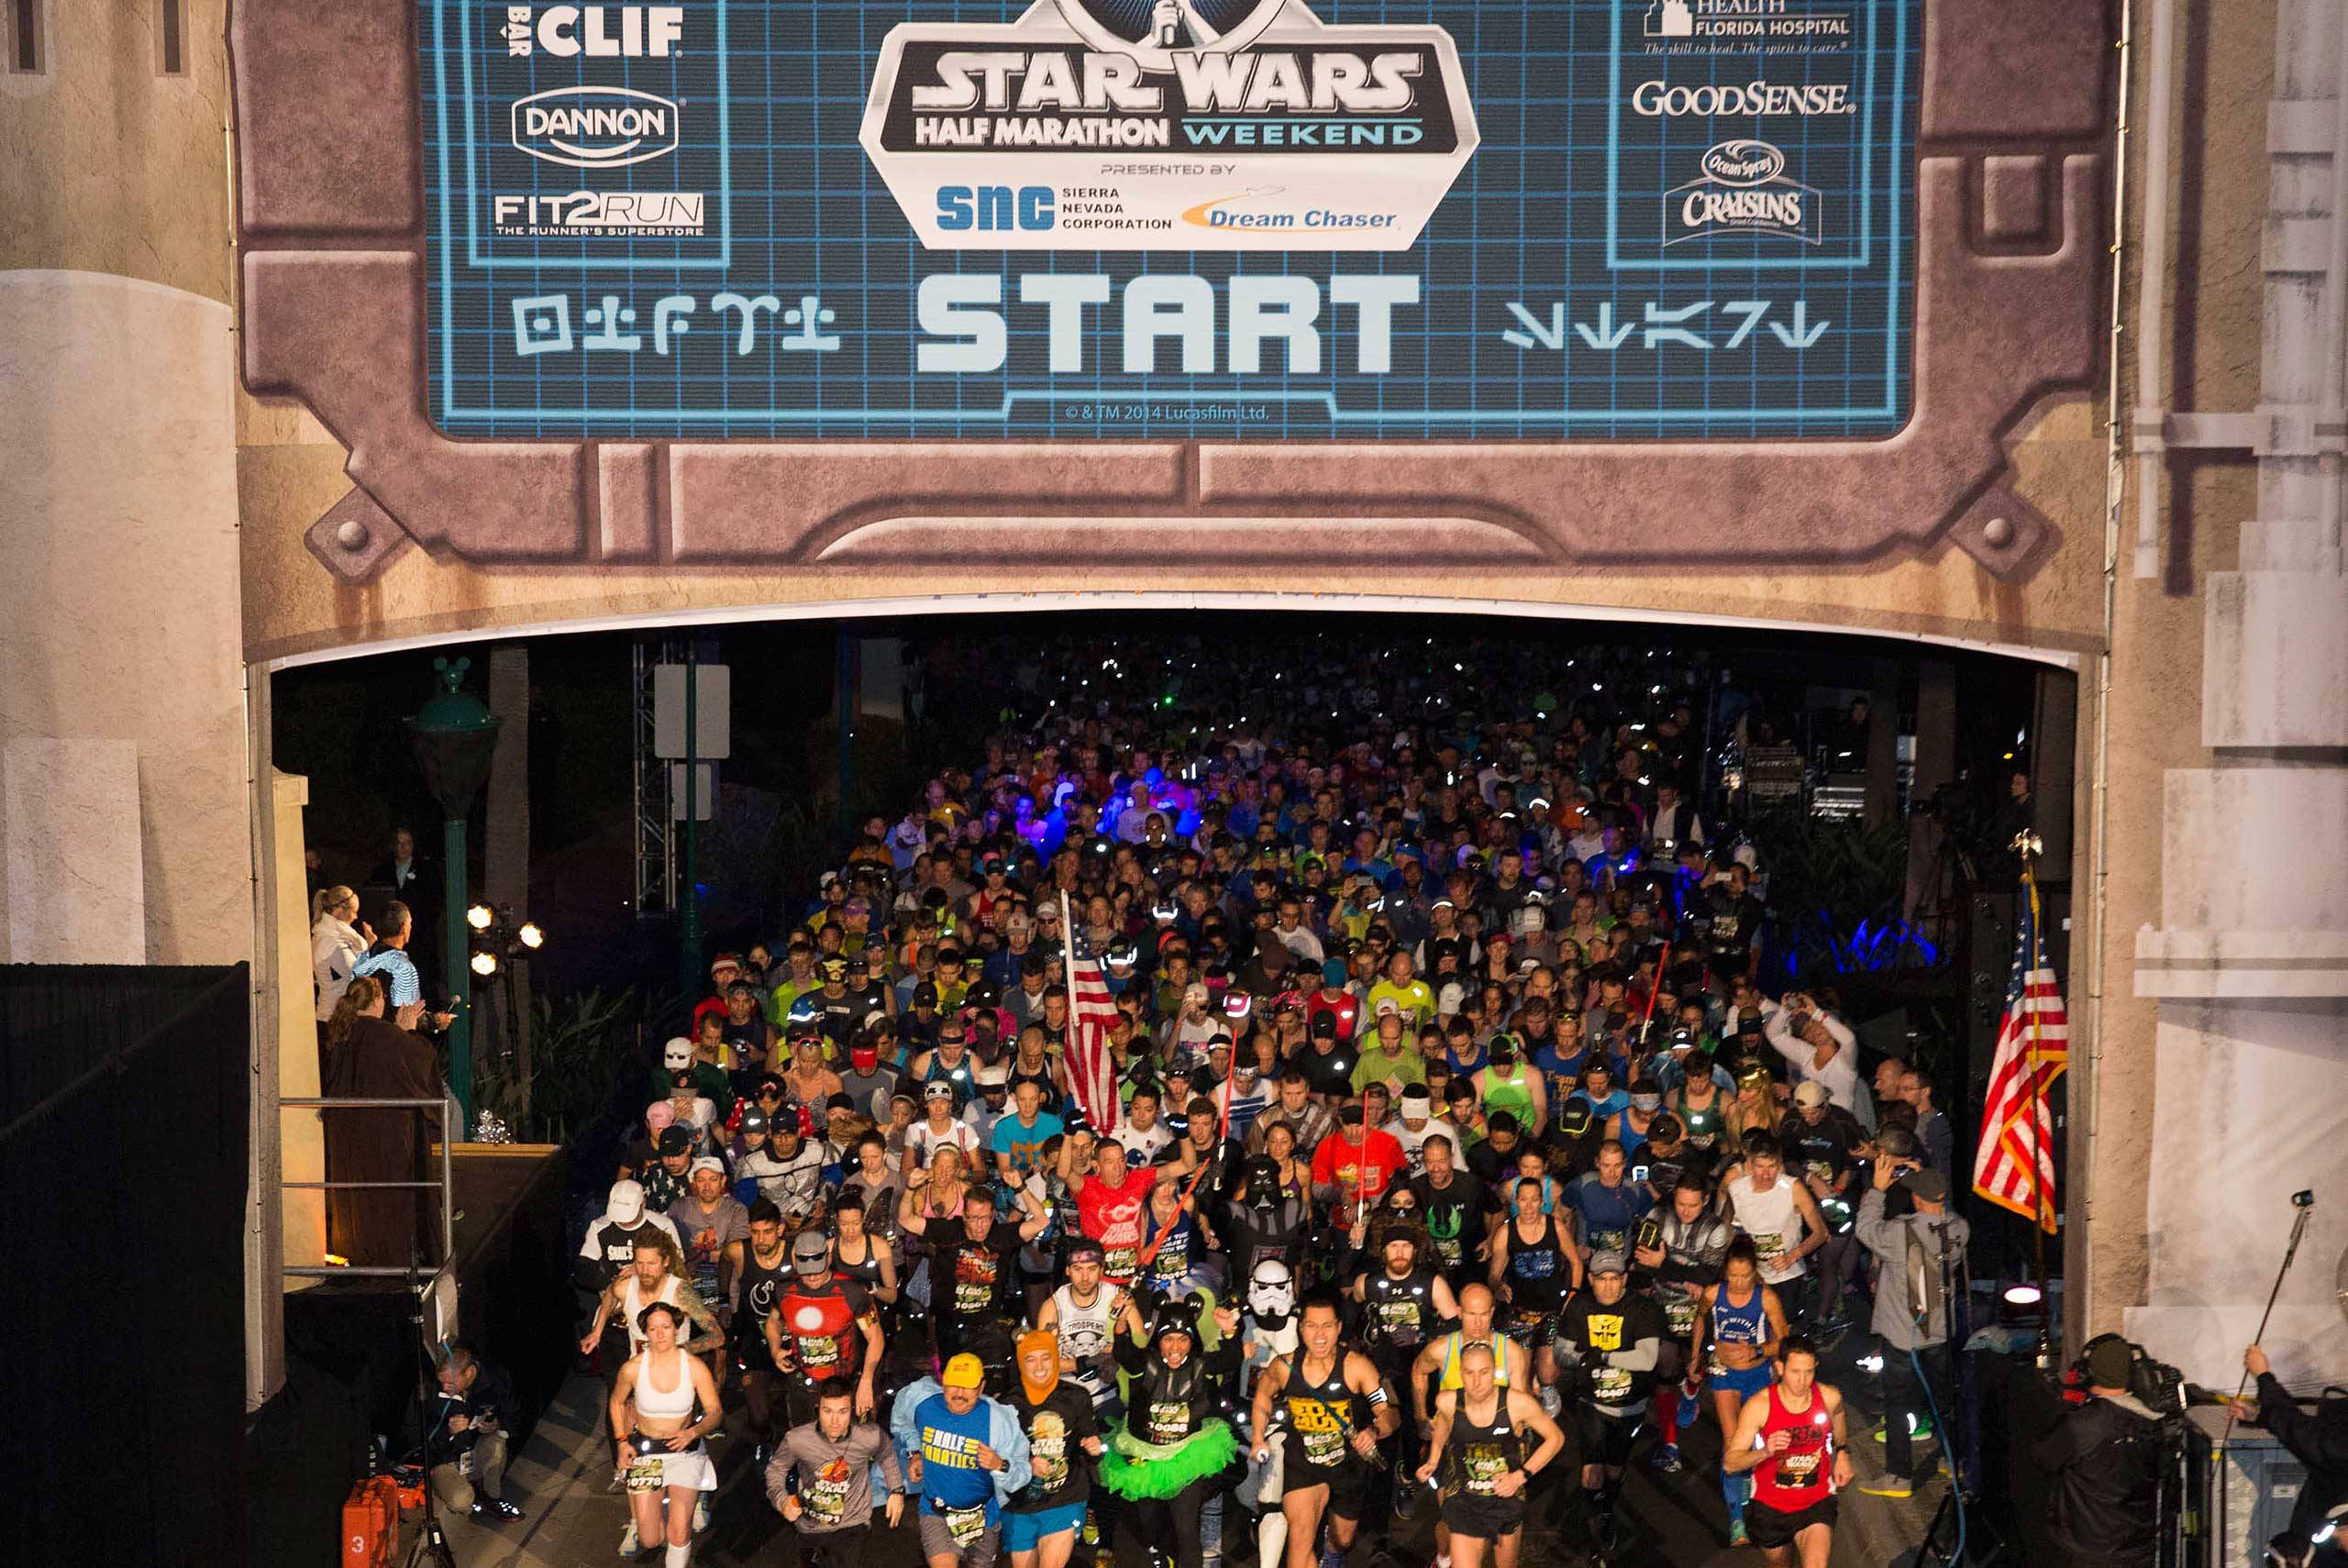 Star Wars races were part of a coast to coast challenge